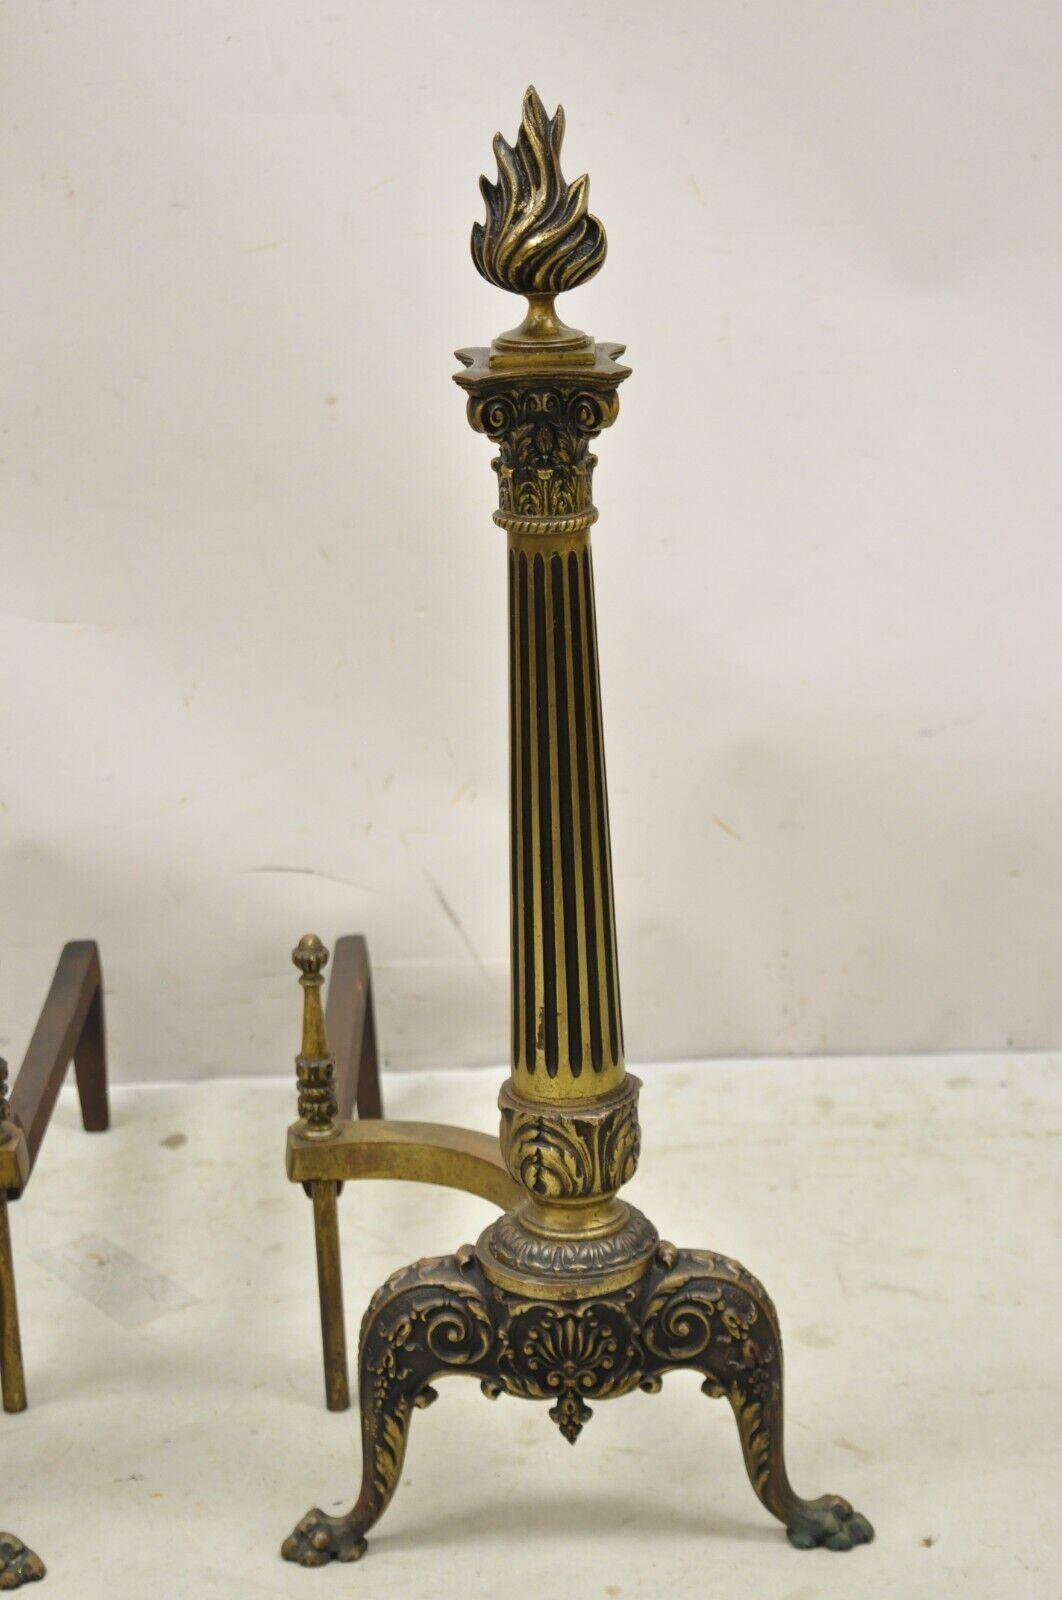 Antique French Empire Style Bronze Column Form Flame Finial Andirons - a Pair For Sale 2